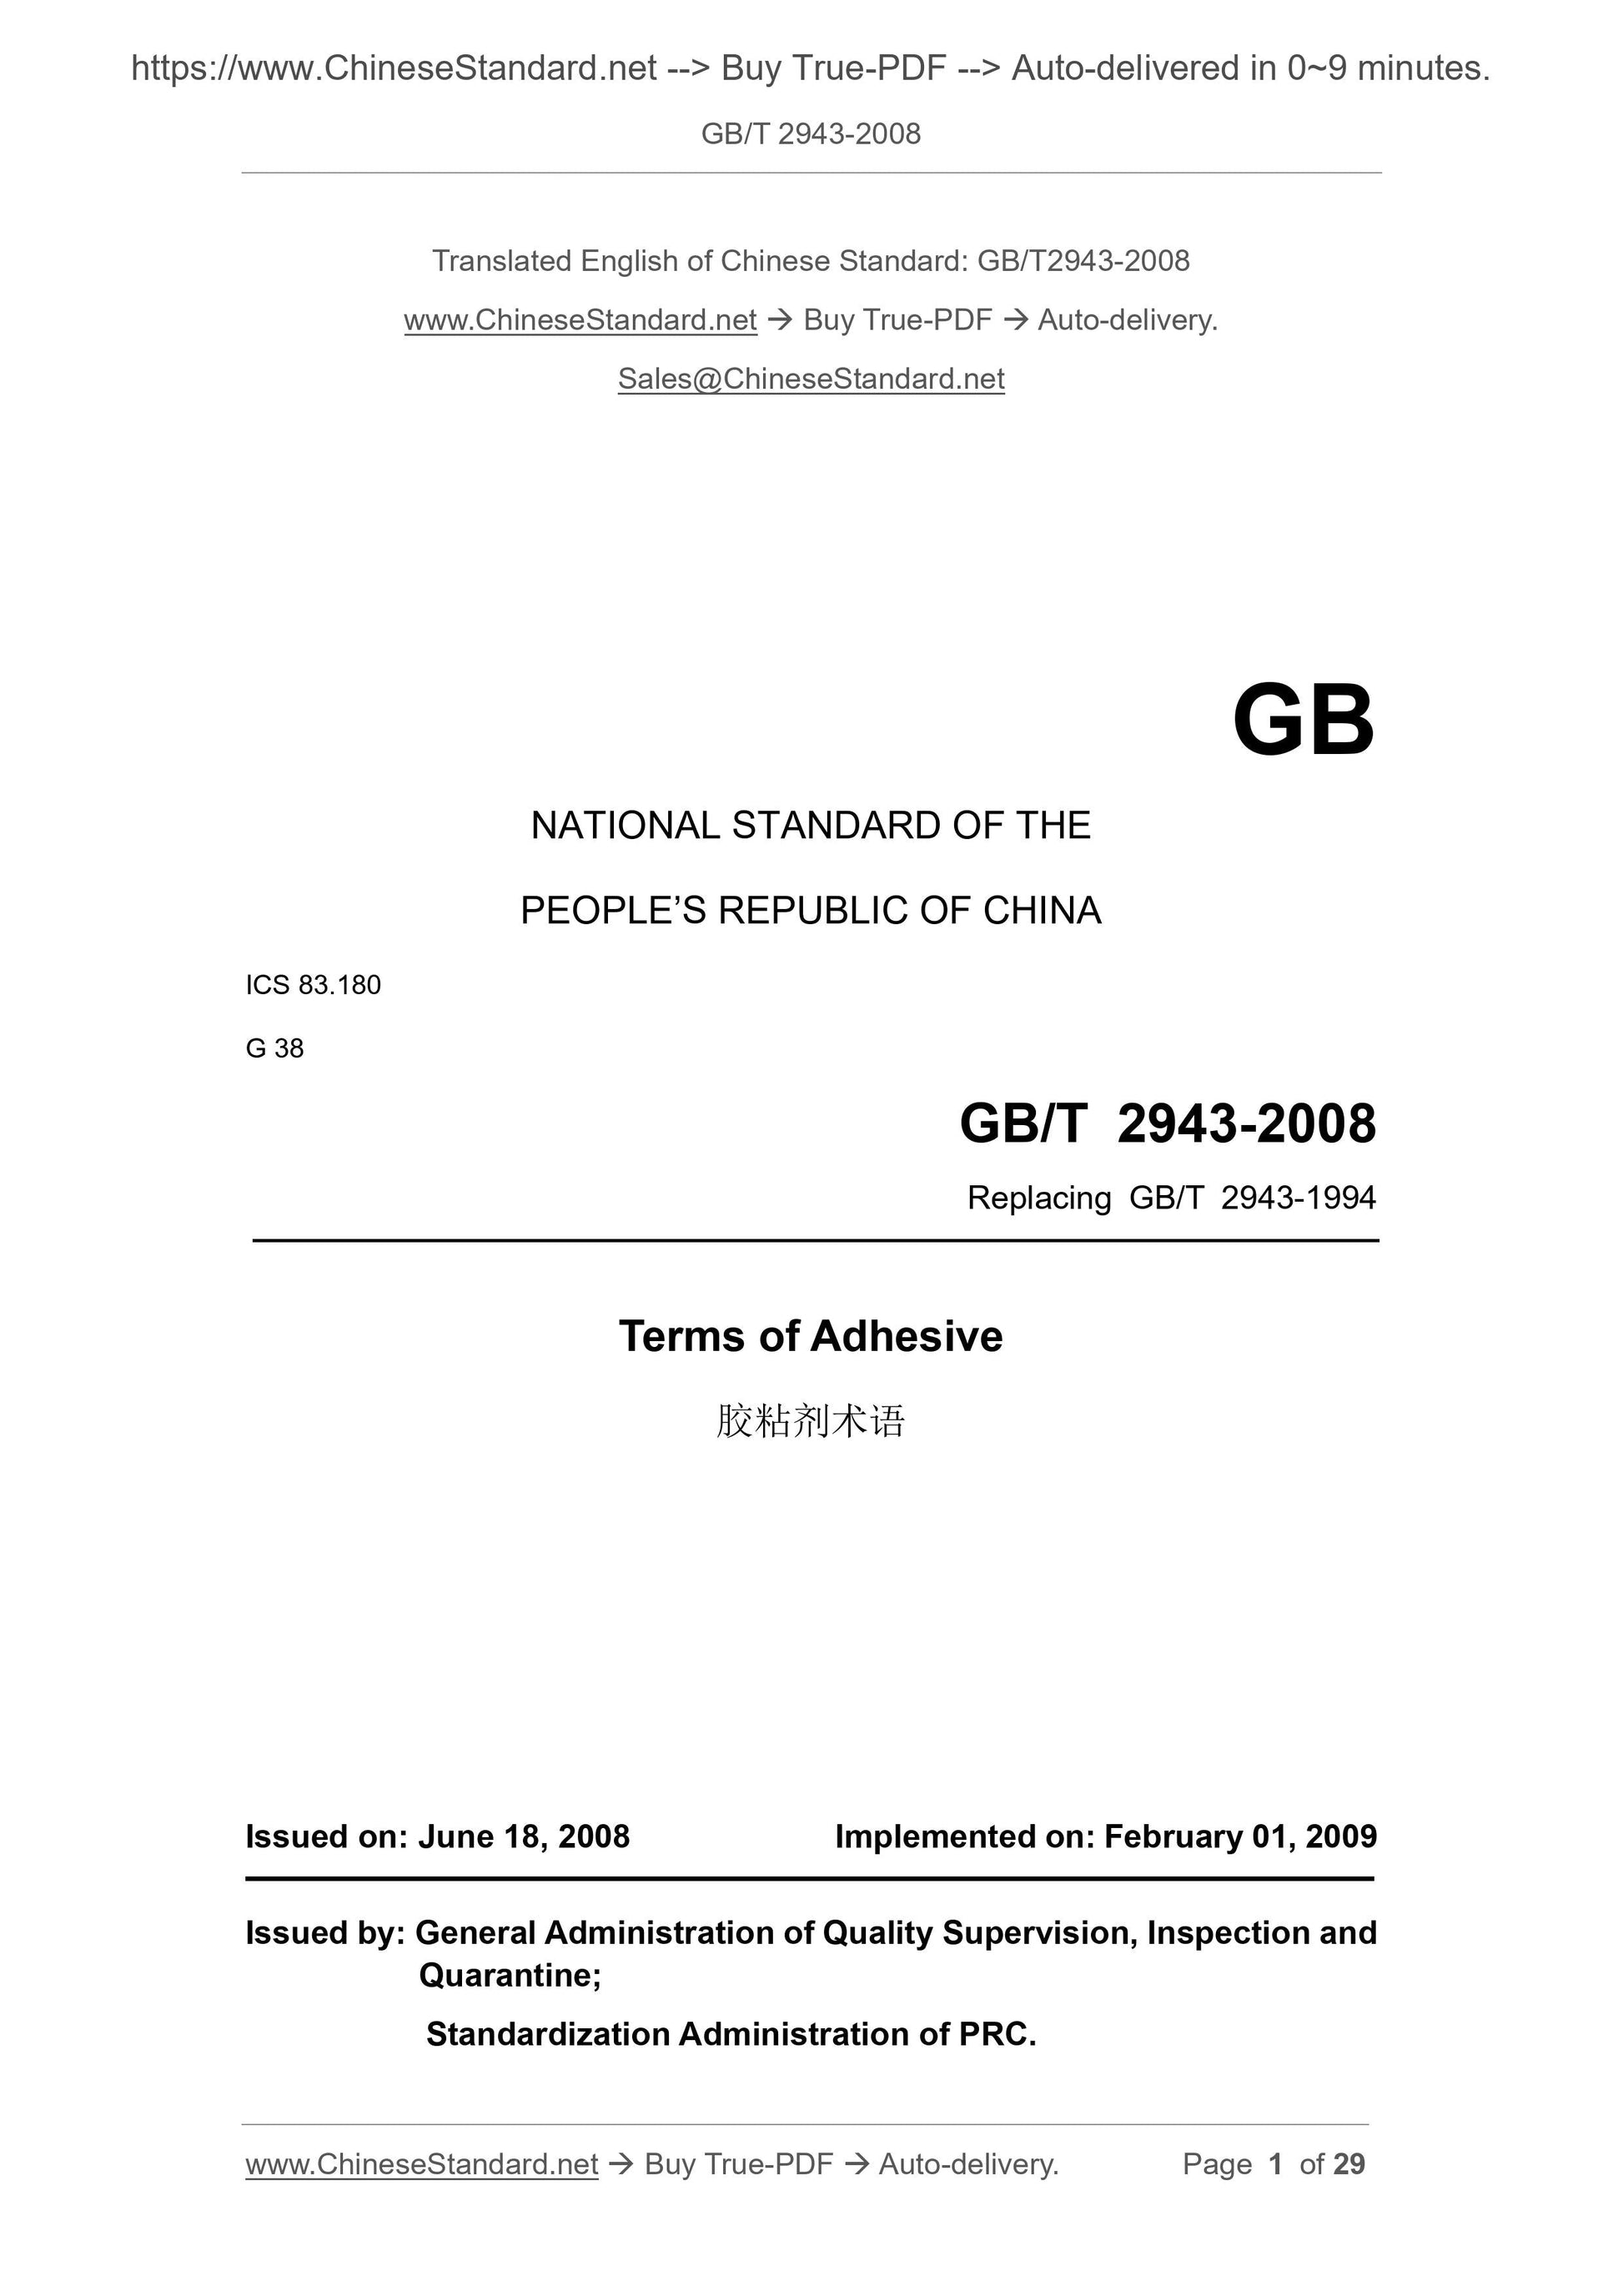 GB/T 2943-2008 Page 1